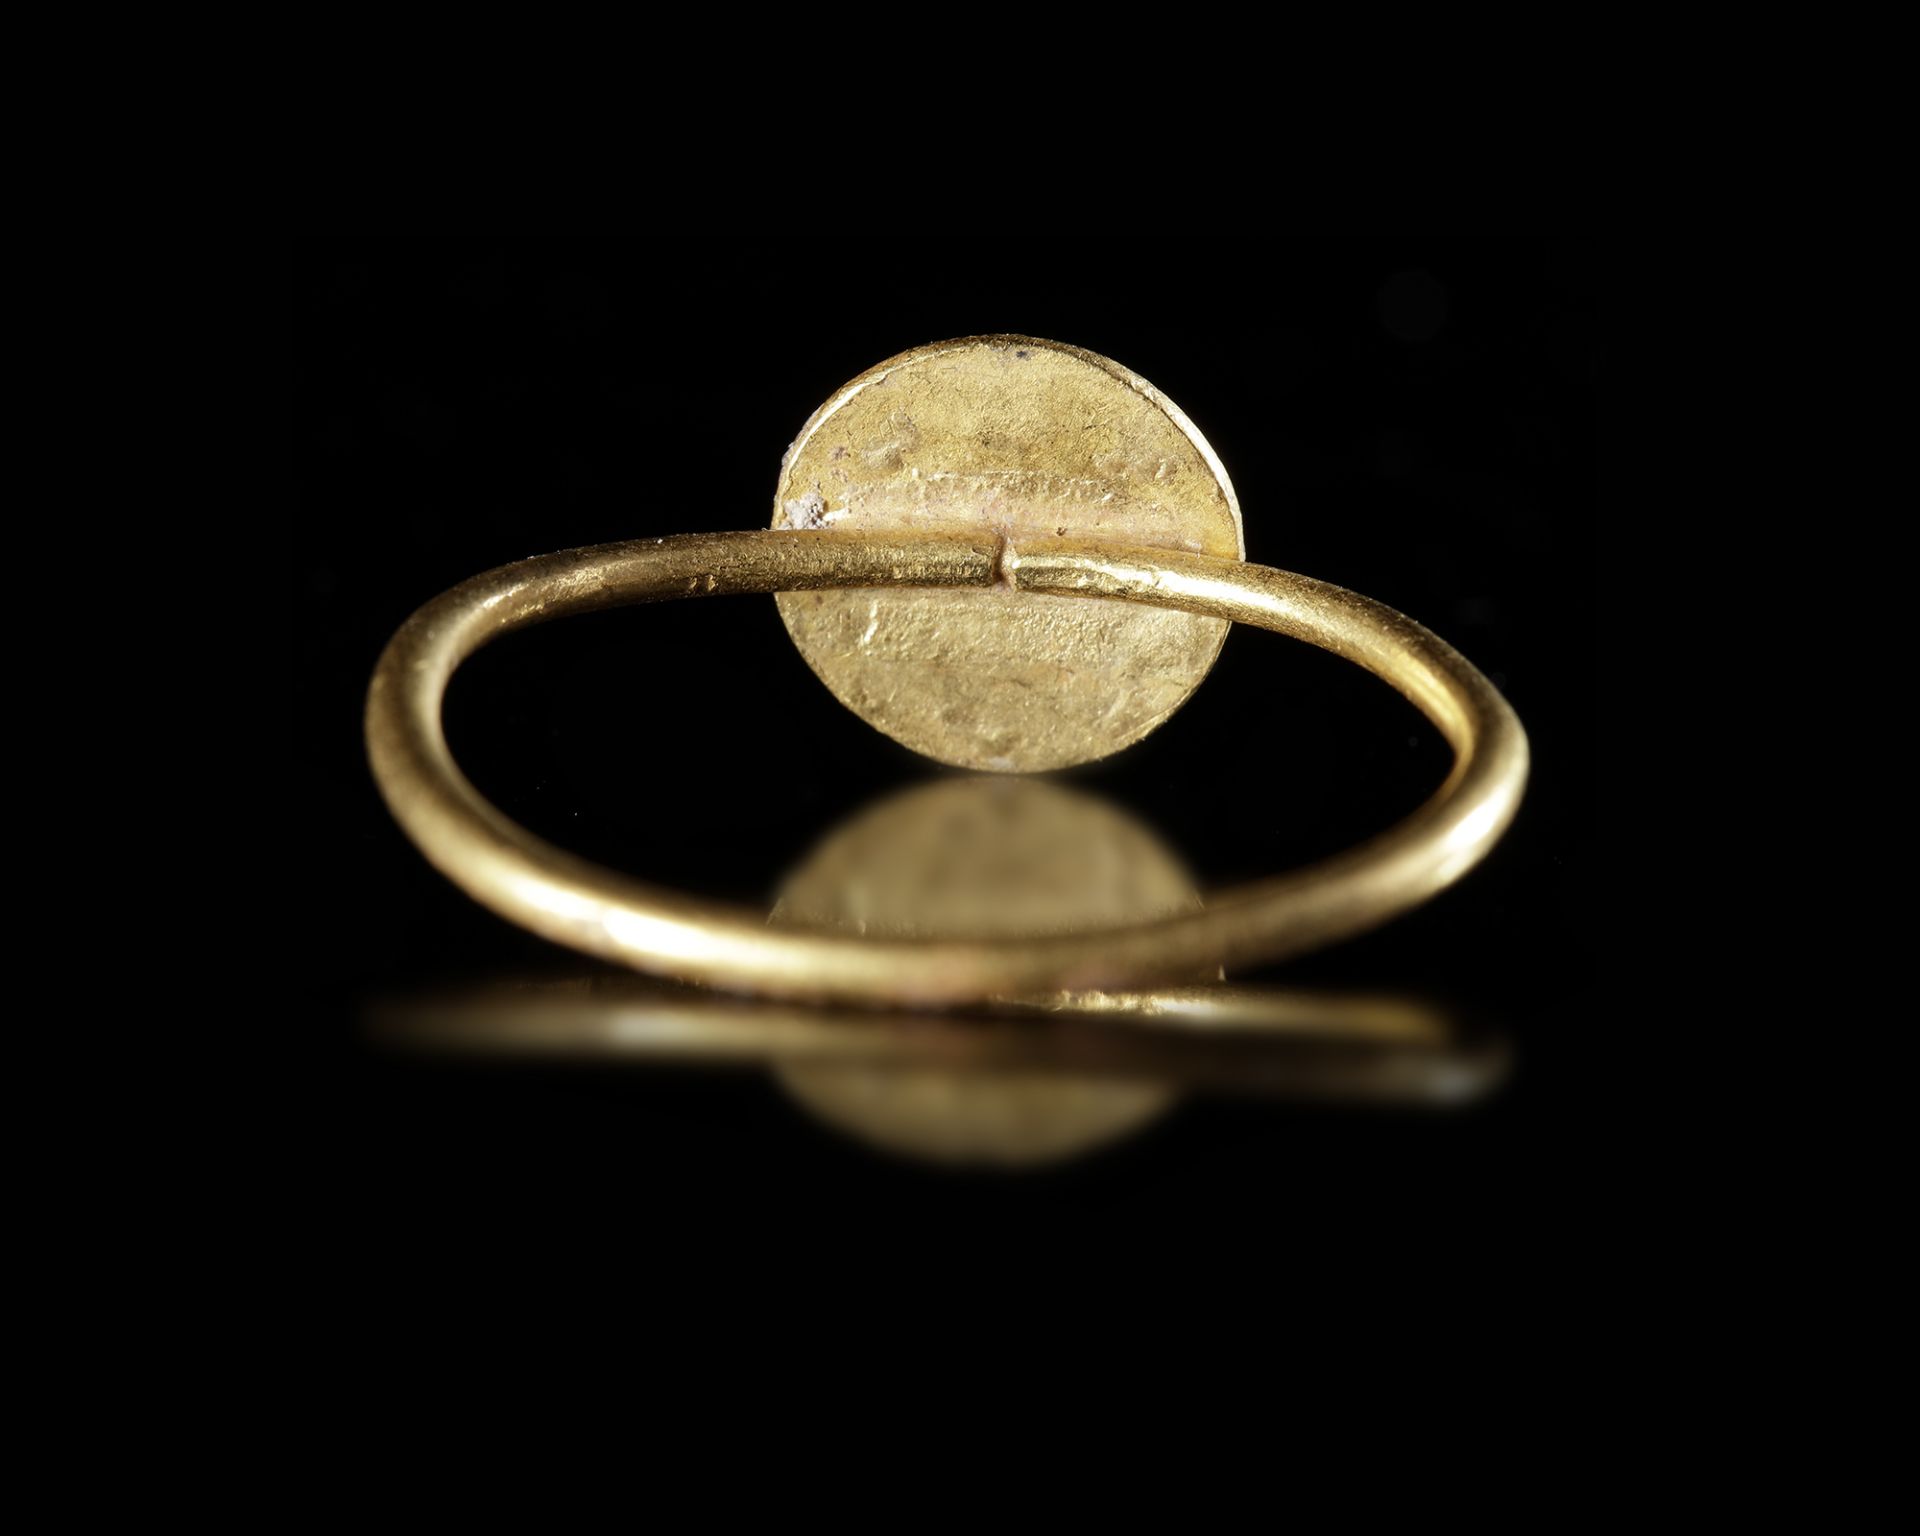 A BYZANTINE GOLD RING WITH MENORAH, 6TH-7TH CENTURY AD - Image 3 of 3